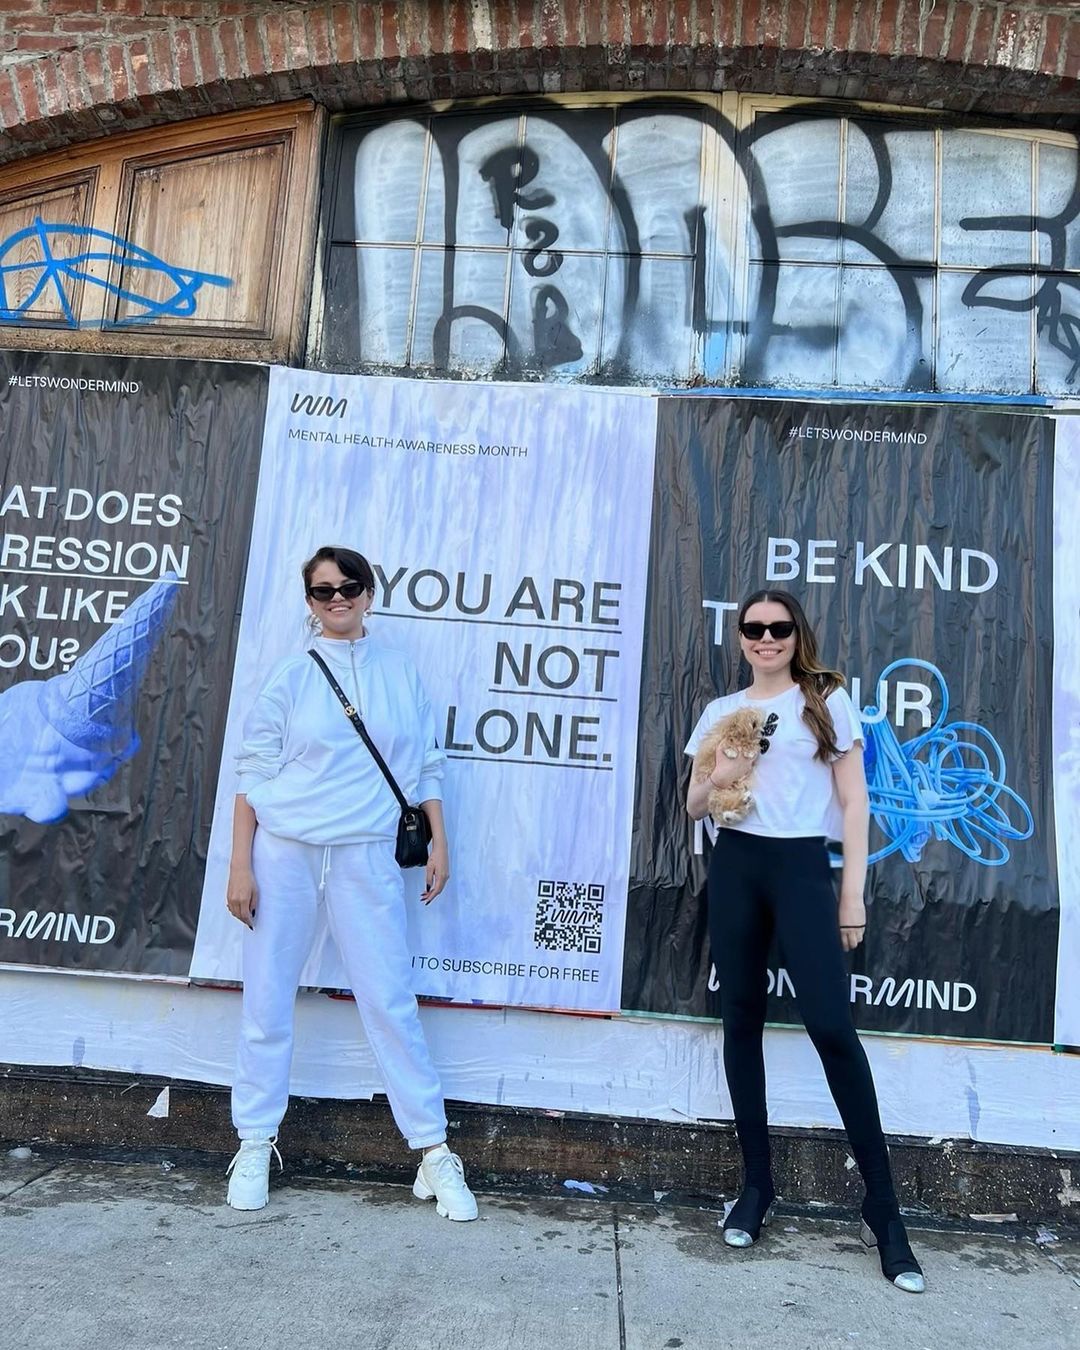 This month @officialwondermind has placed posters all around NYC as a reminder that you are not alone ♥️